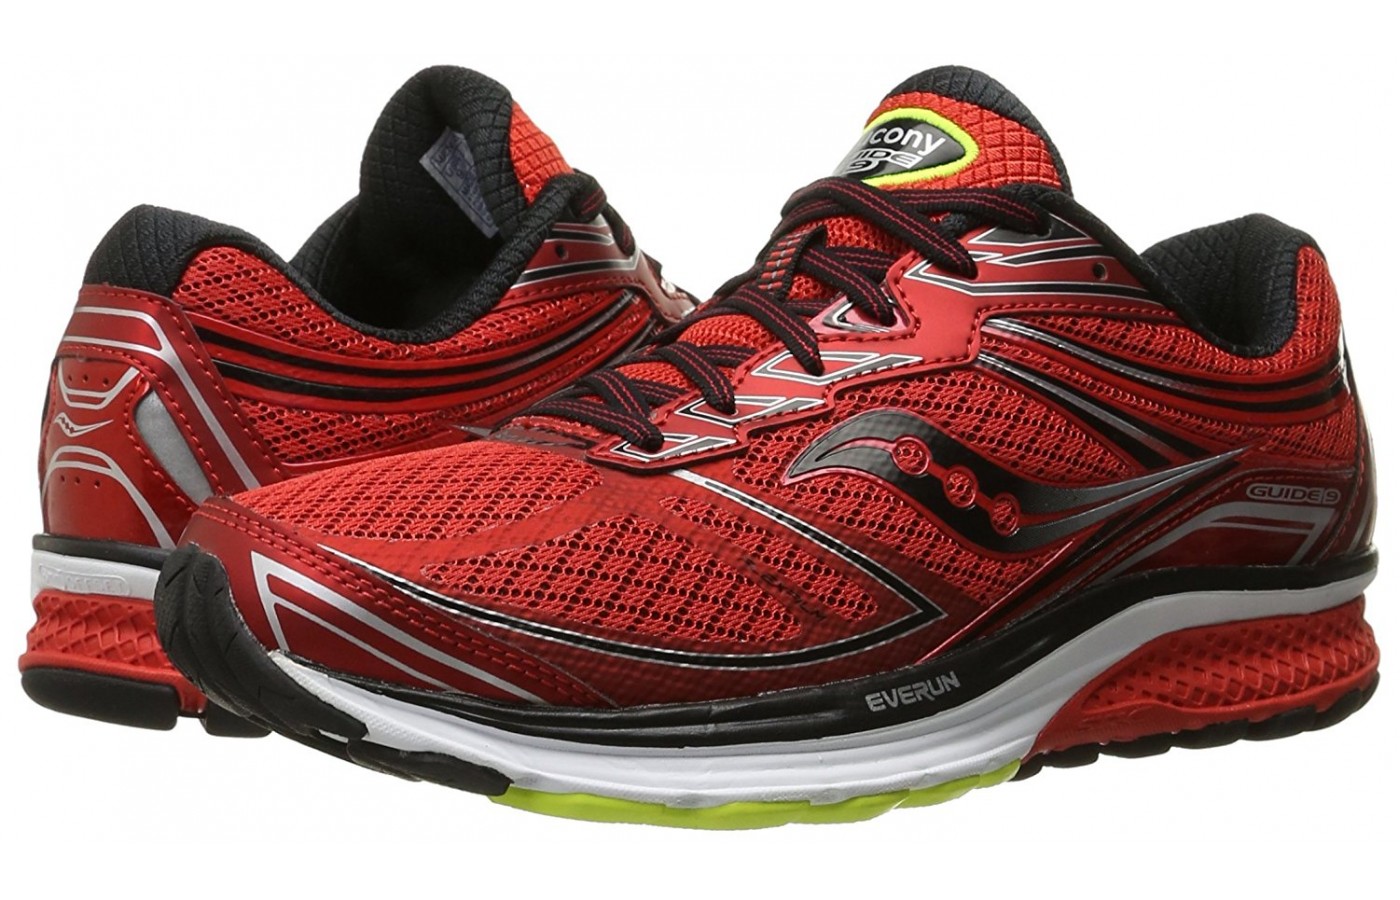 Saucony Guide 9 Reviewed and Rated 